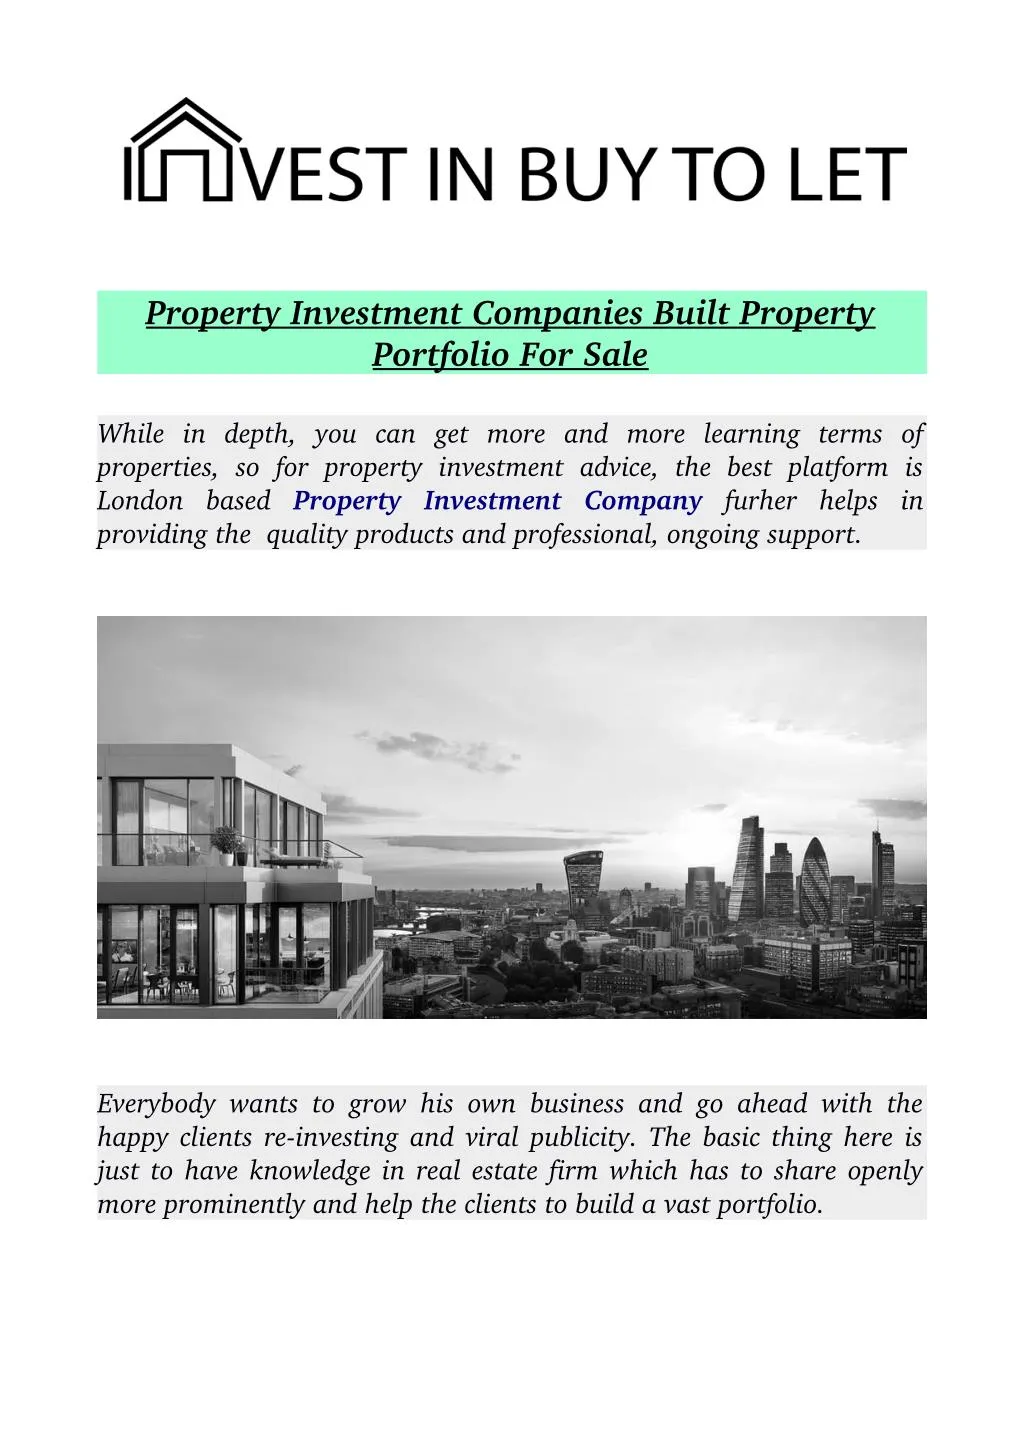 property investment companies built property